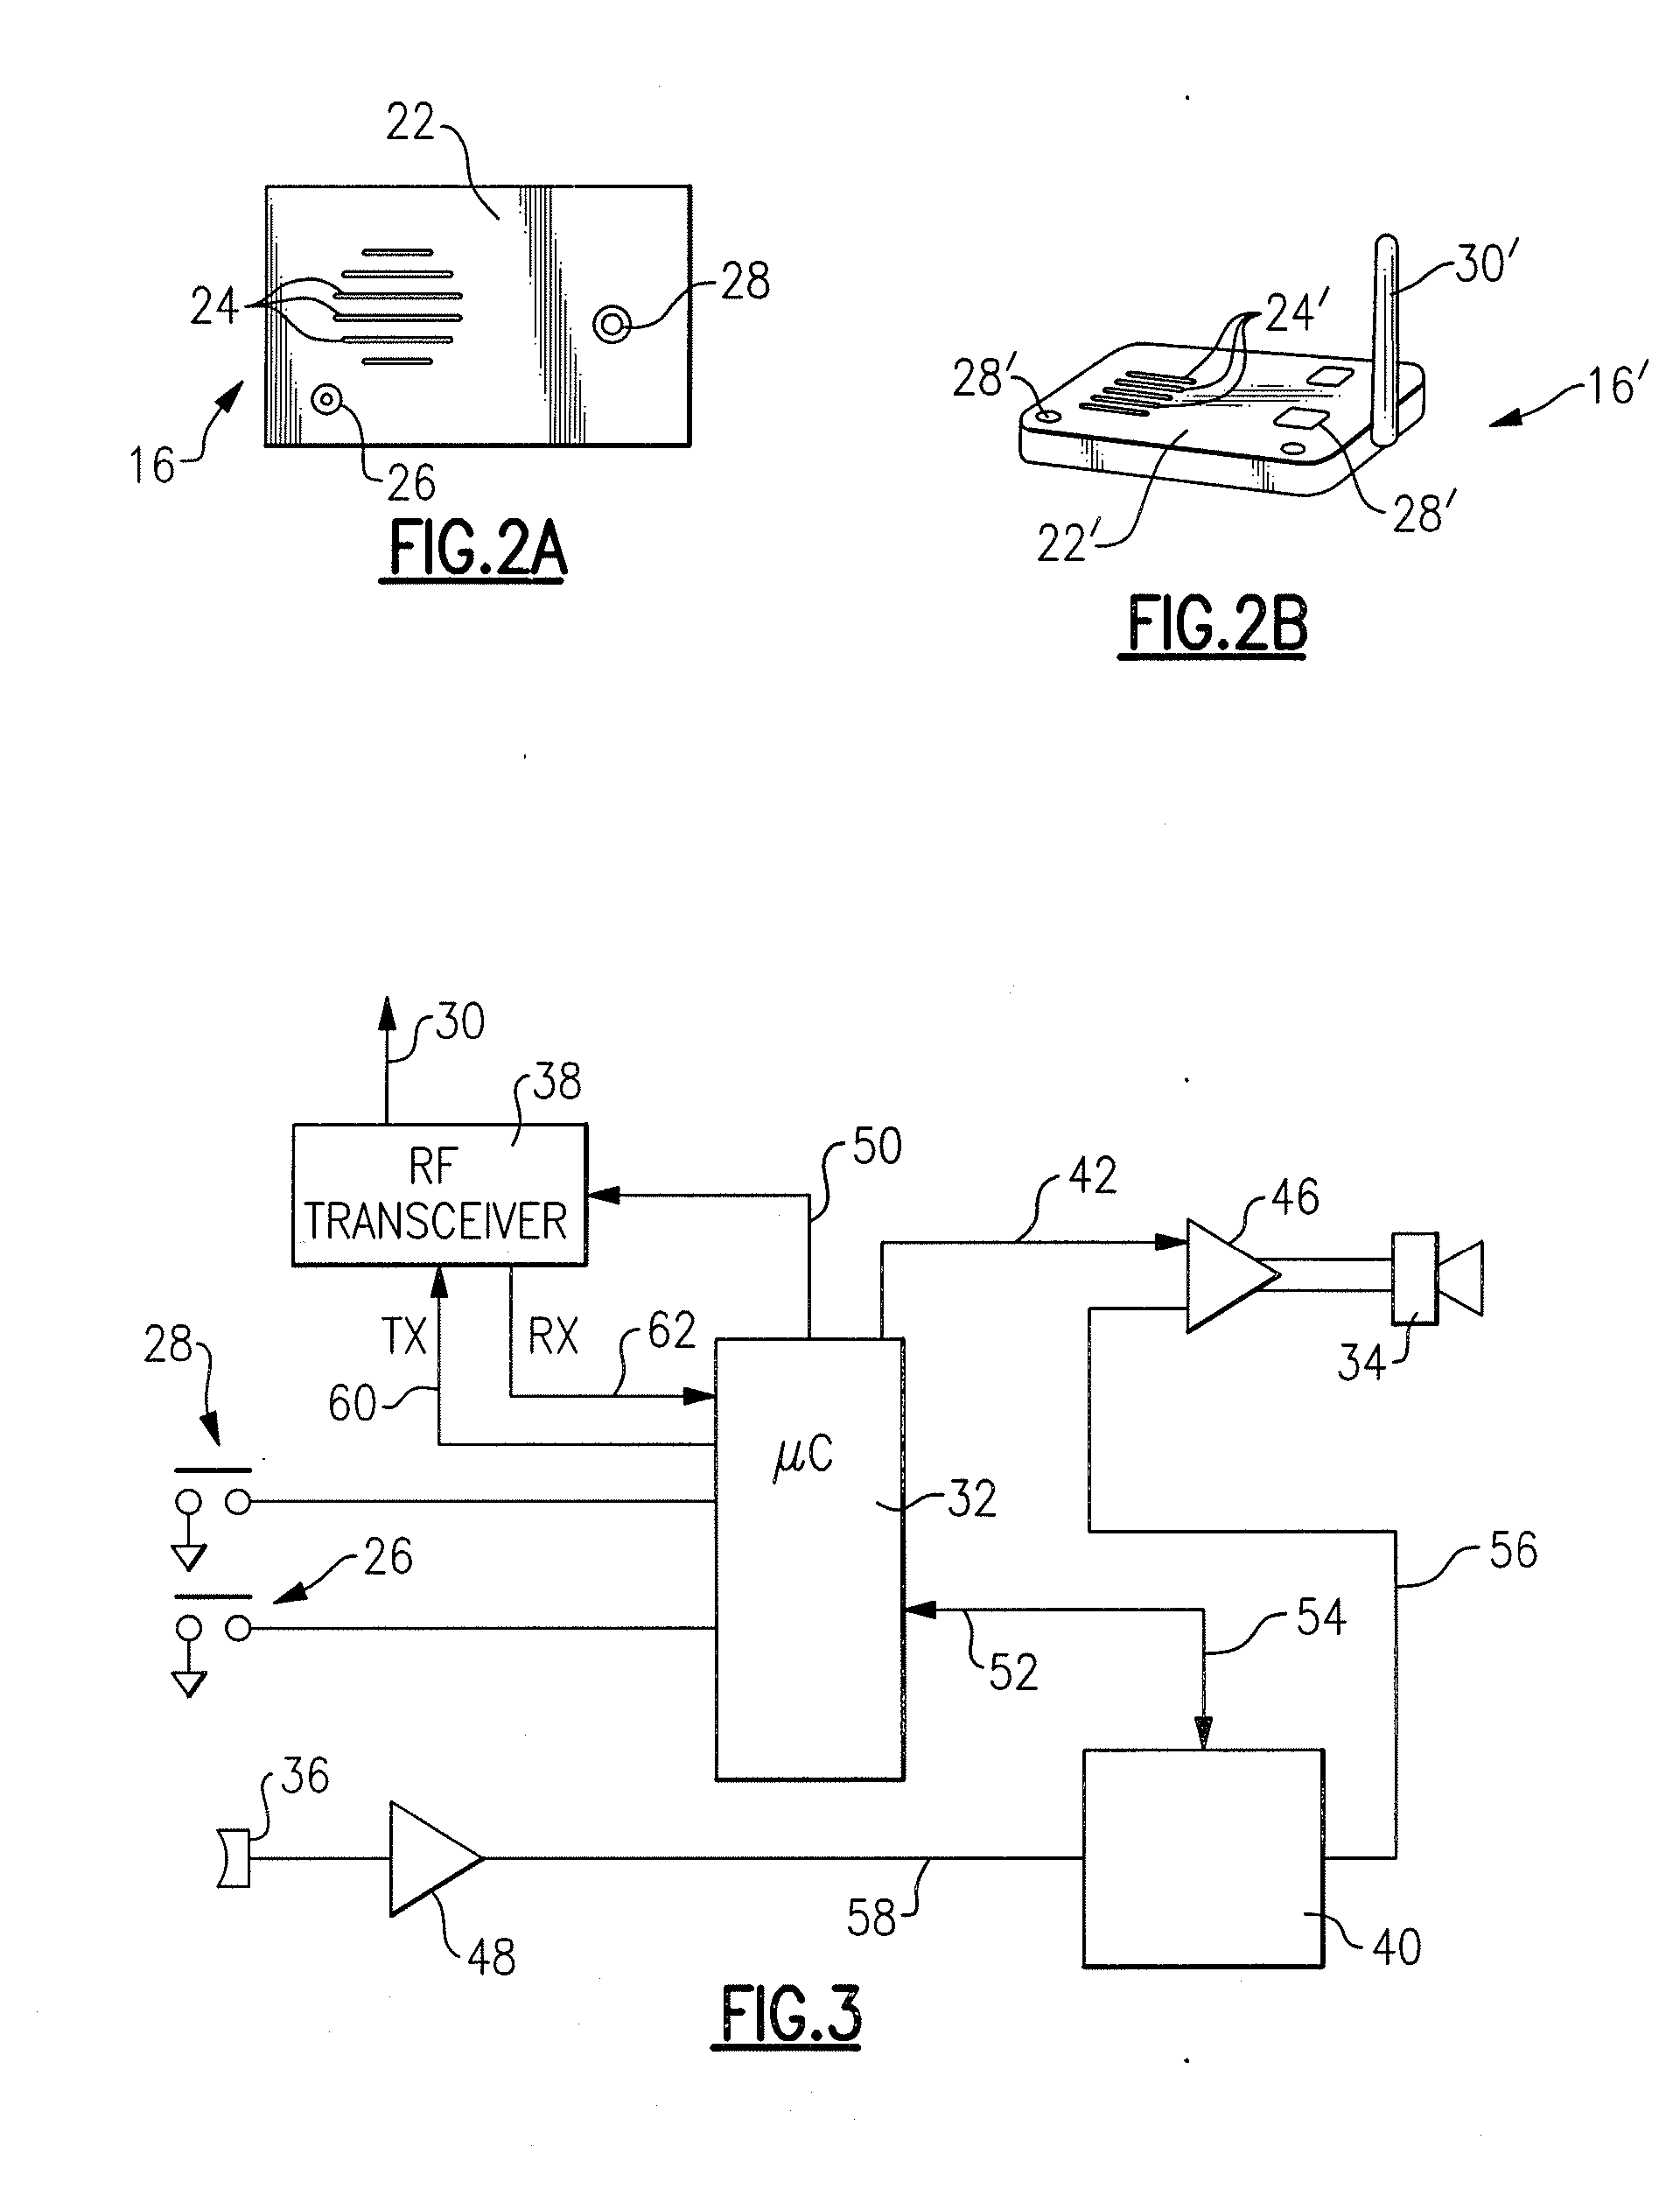 Wireless Gate Control and Communication System